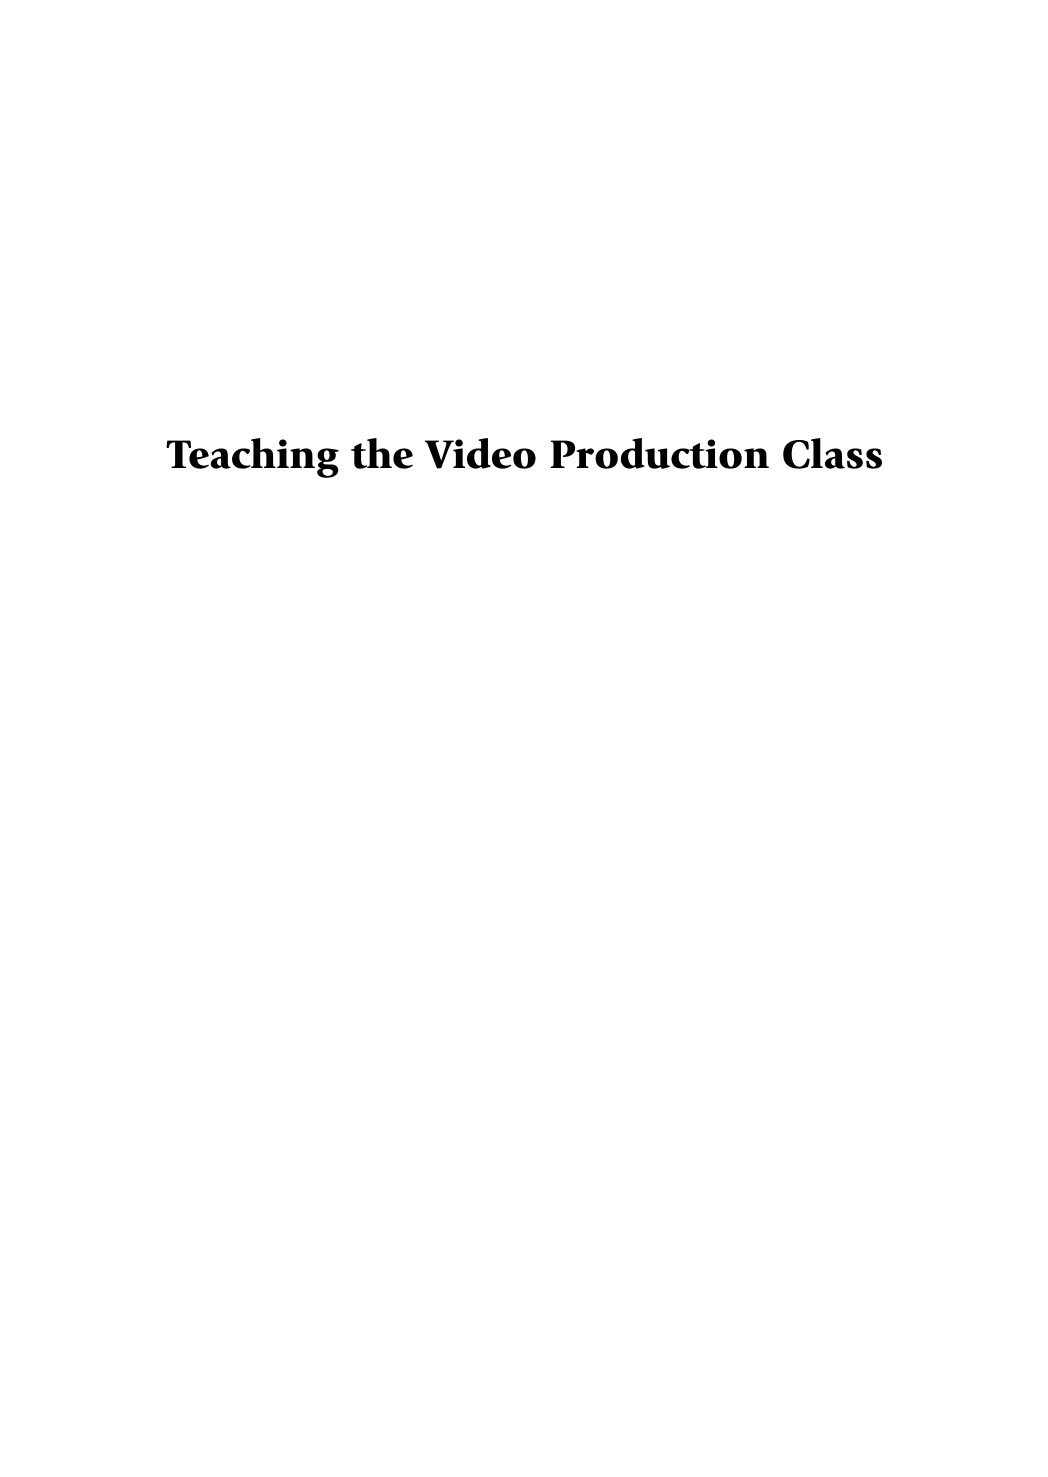 Teaching the Video Production Class: Beyond the Morning Newscast page i